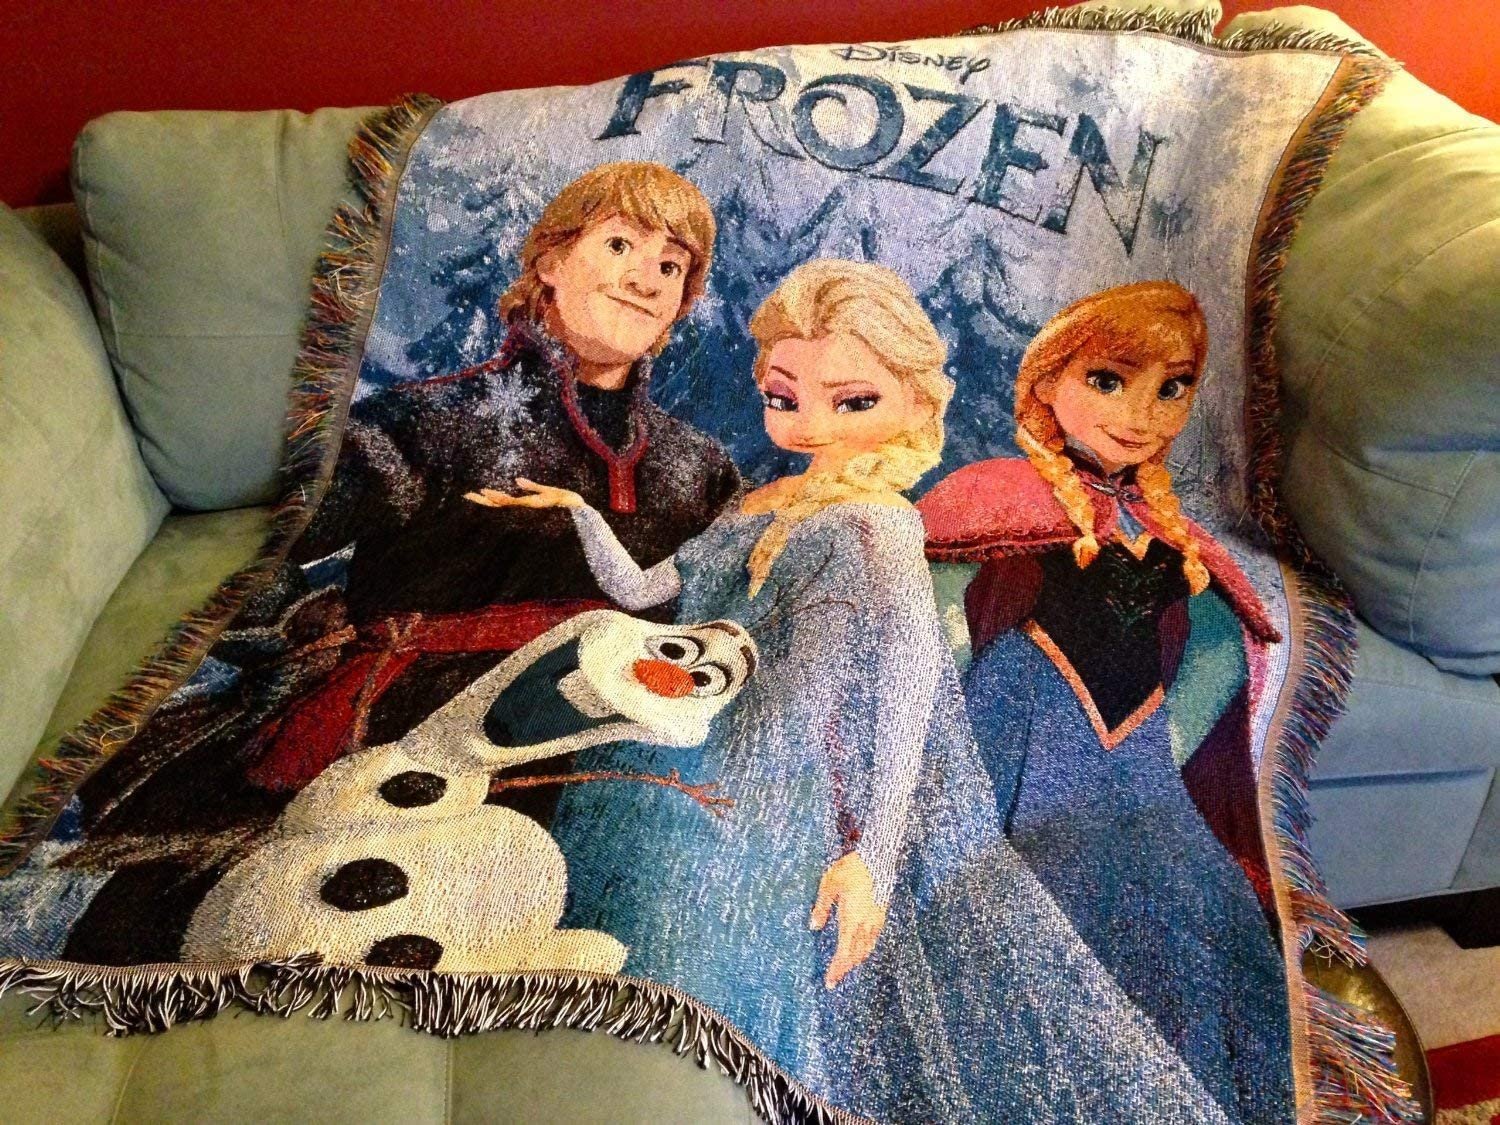 Disney Frozen Tapestry Throw Blanket, 48x60, Multicolor, Polyester, Machine Wash, 1 Each - image 3 of 4